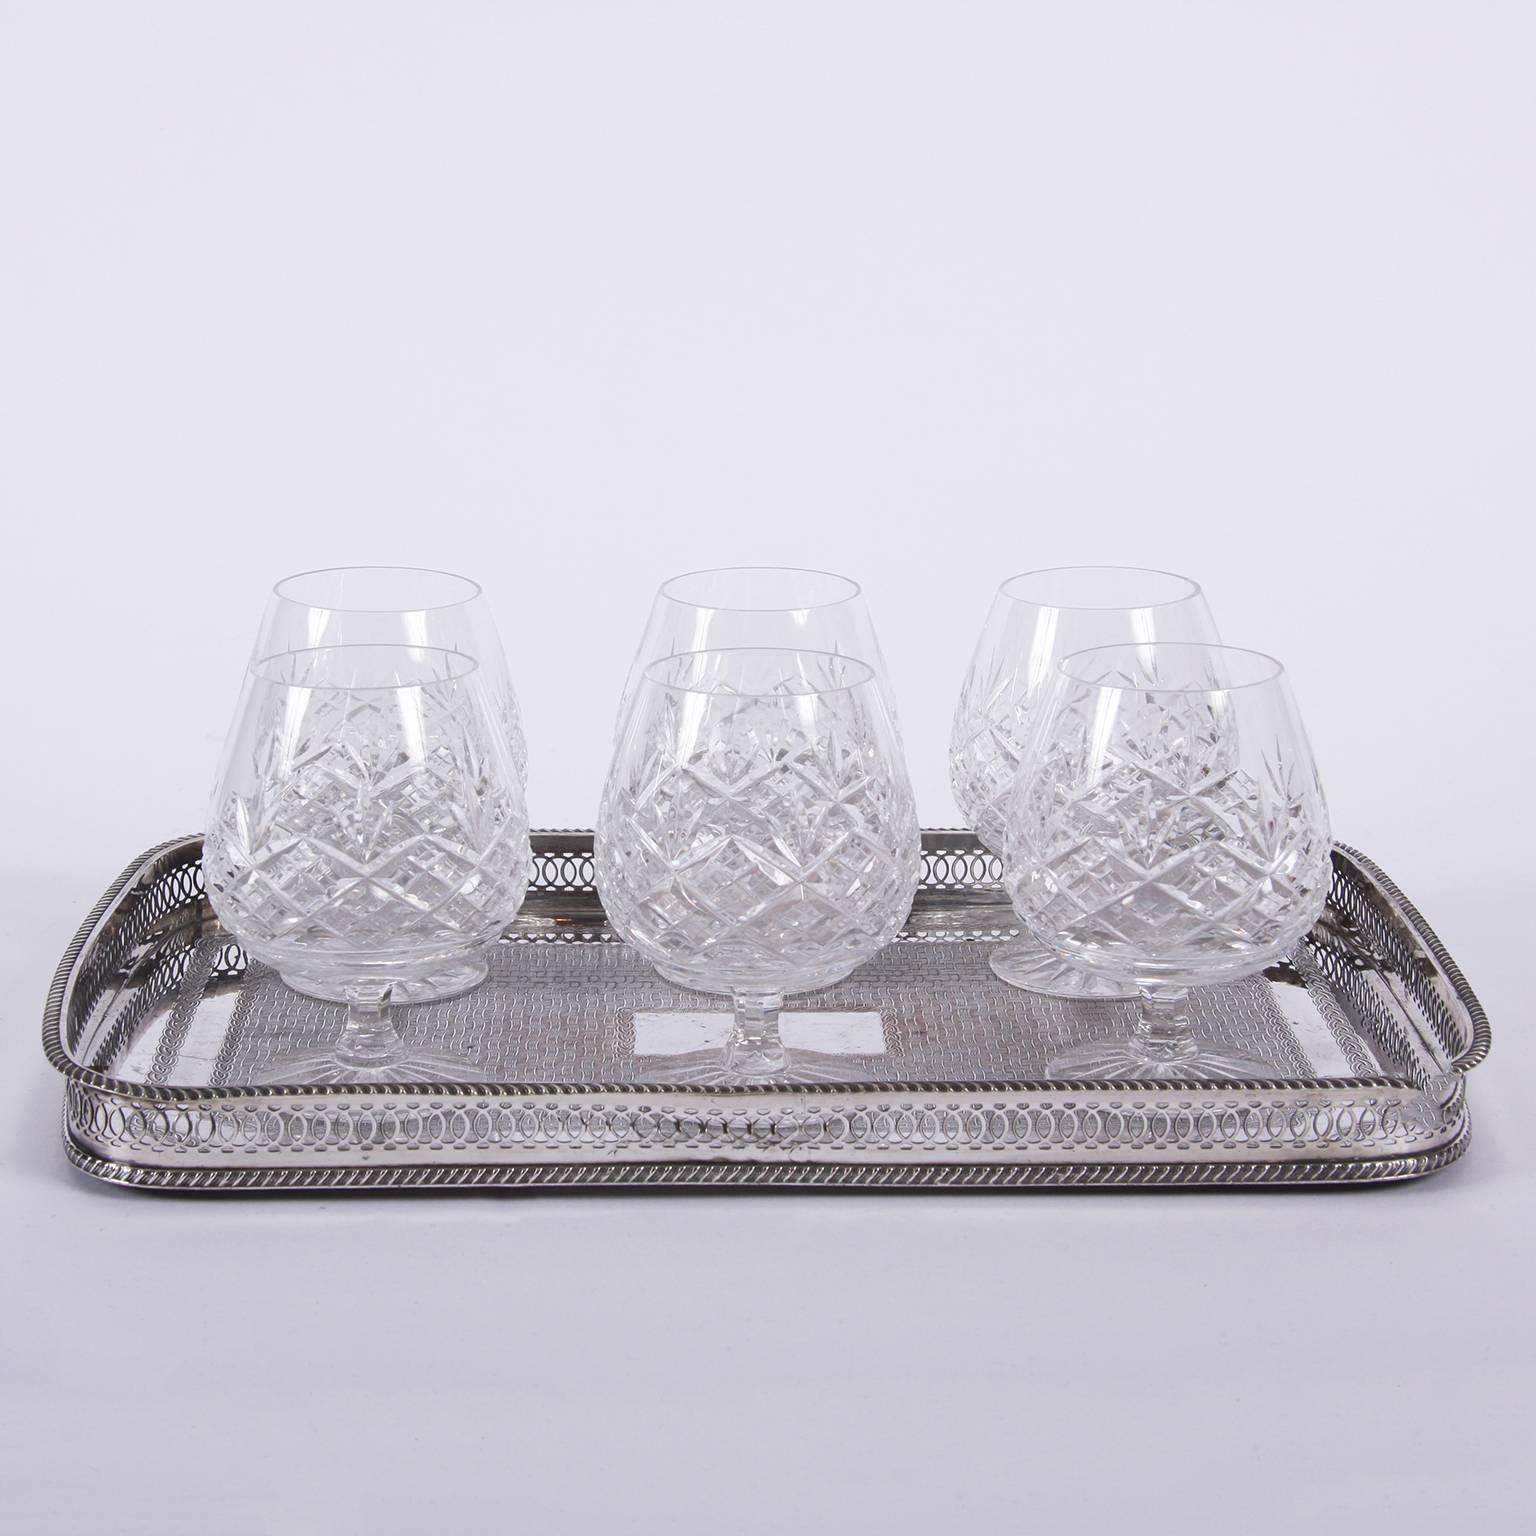 English mid-20th century

A set of six cut-glass brandy balloons in great condition.

Tray is no longer available.